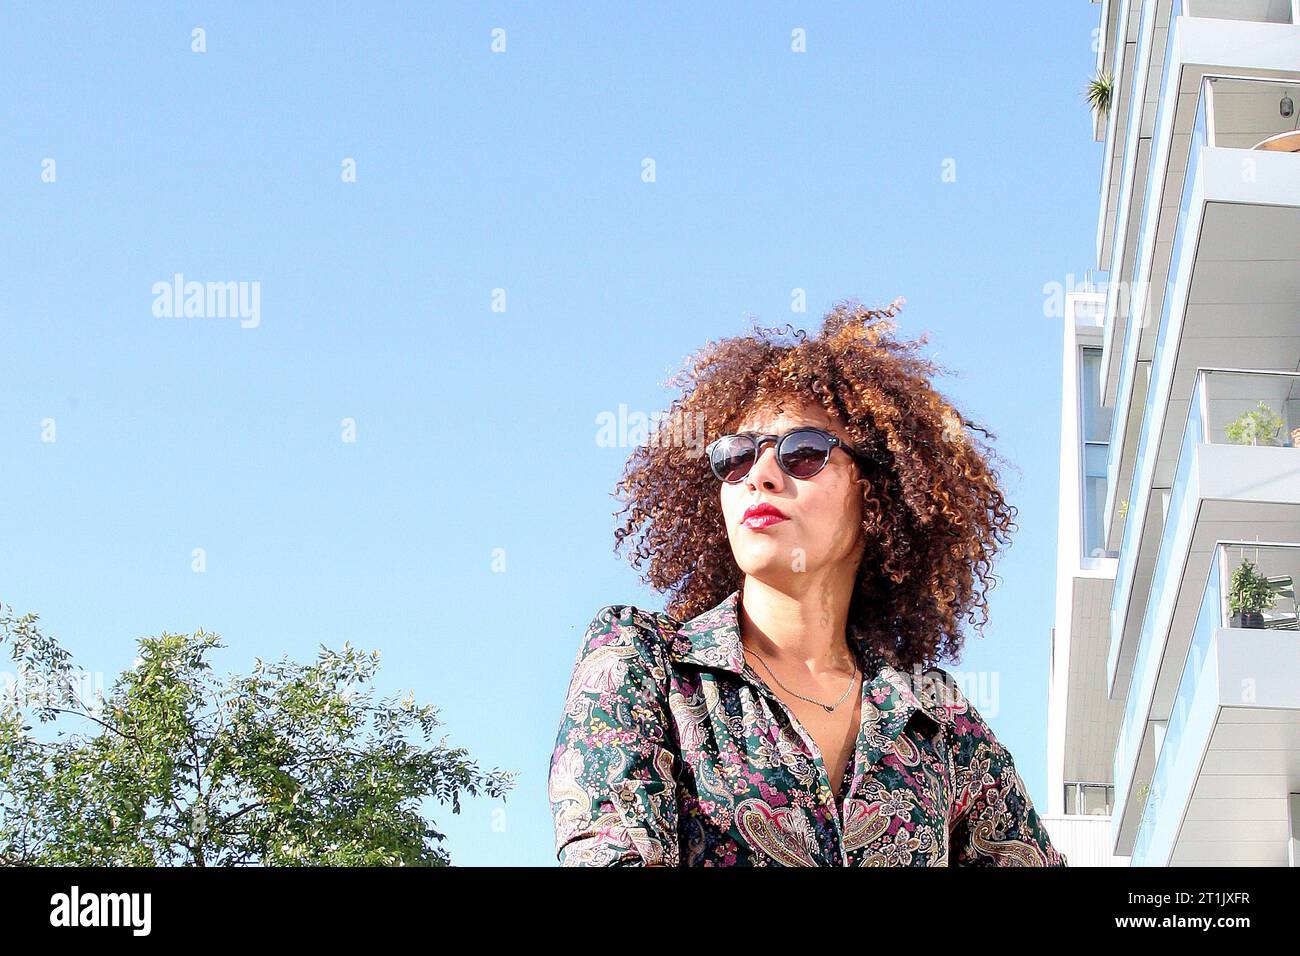 HEAD PORTRAIT OF A CURLY HAIR WOMAN WITH SUNGLASSES ON A HOT SUNNY DAY Stock Photo